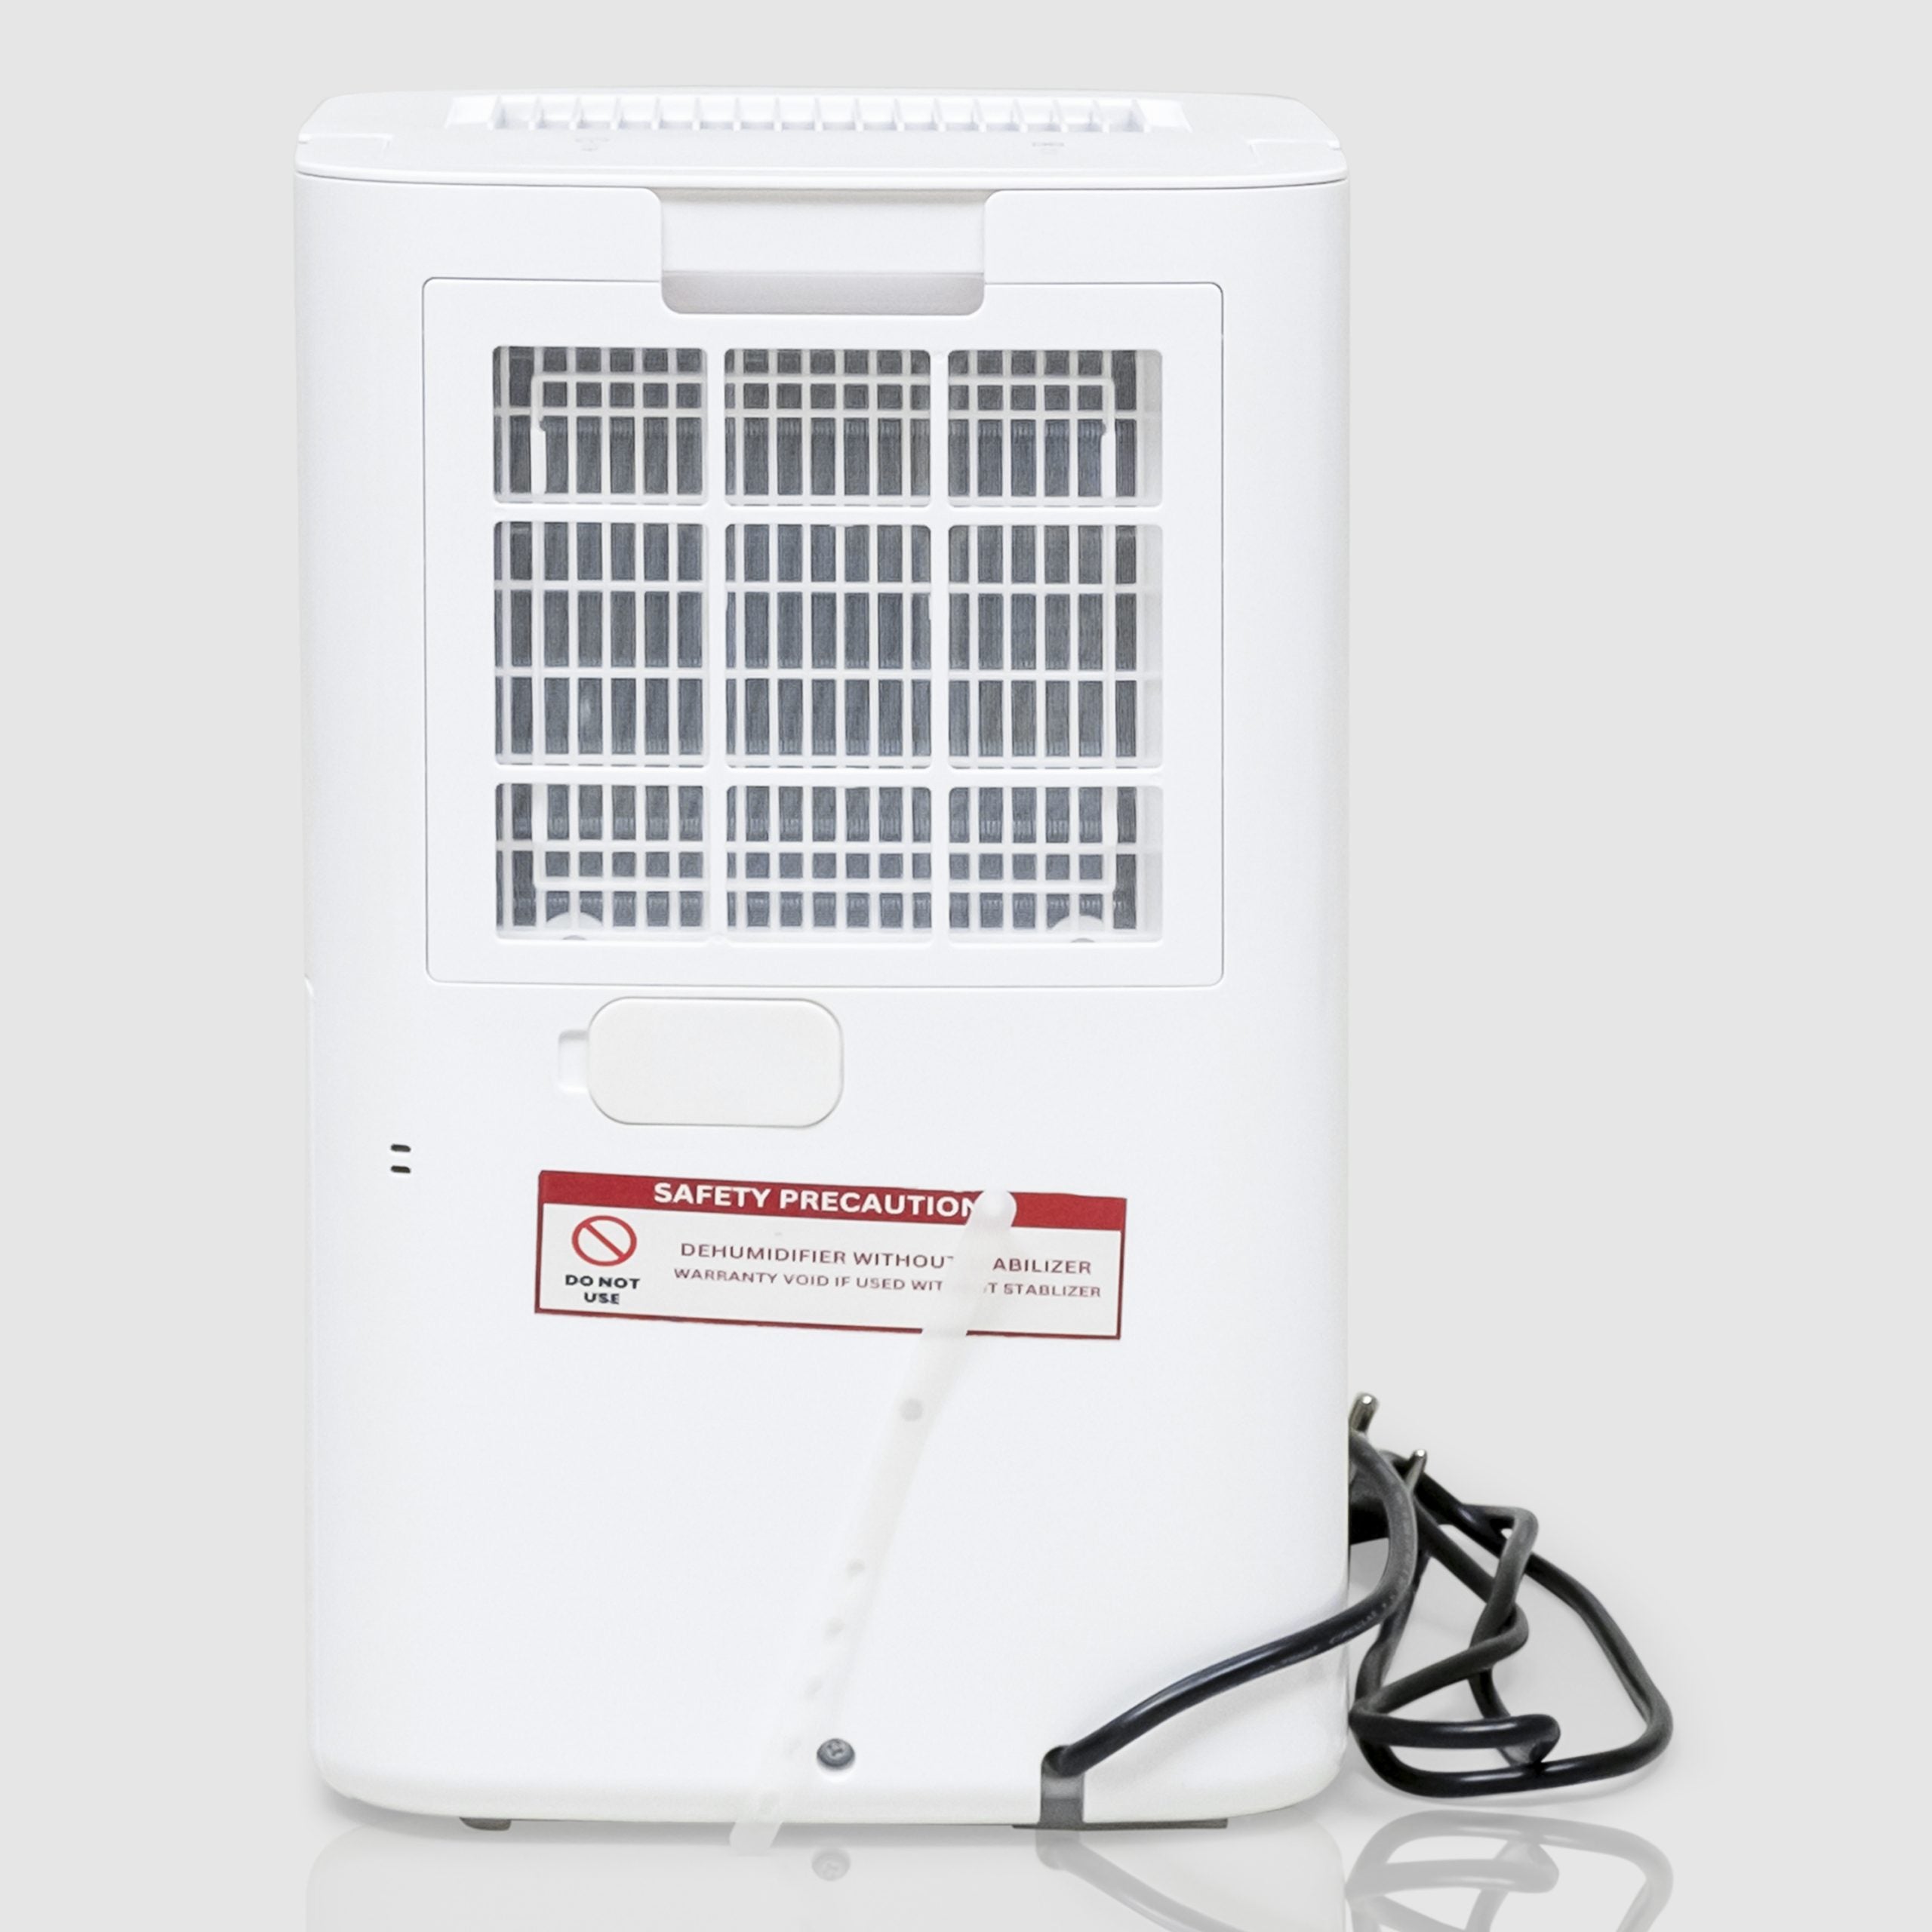 Rear view of the White Westinghouse Dehumidifier WDE702, showcasing the air vent, power cord, and safety precaution label. The sleek white design is suitable for maintaining optimal humidity levels in residential and commercial spaces.